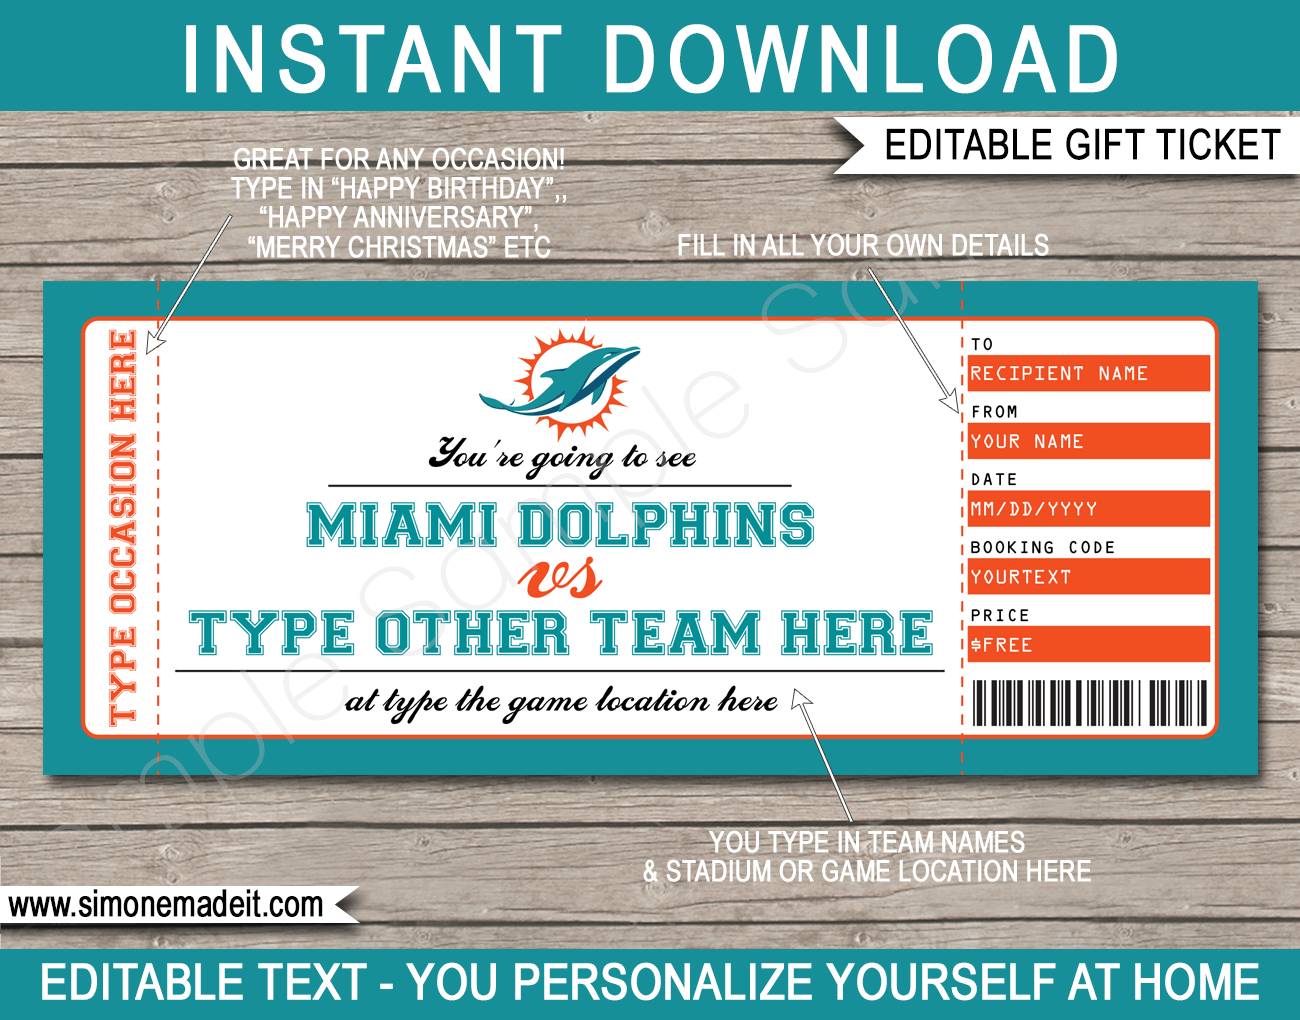 pats dolphins tickets